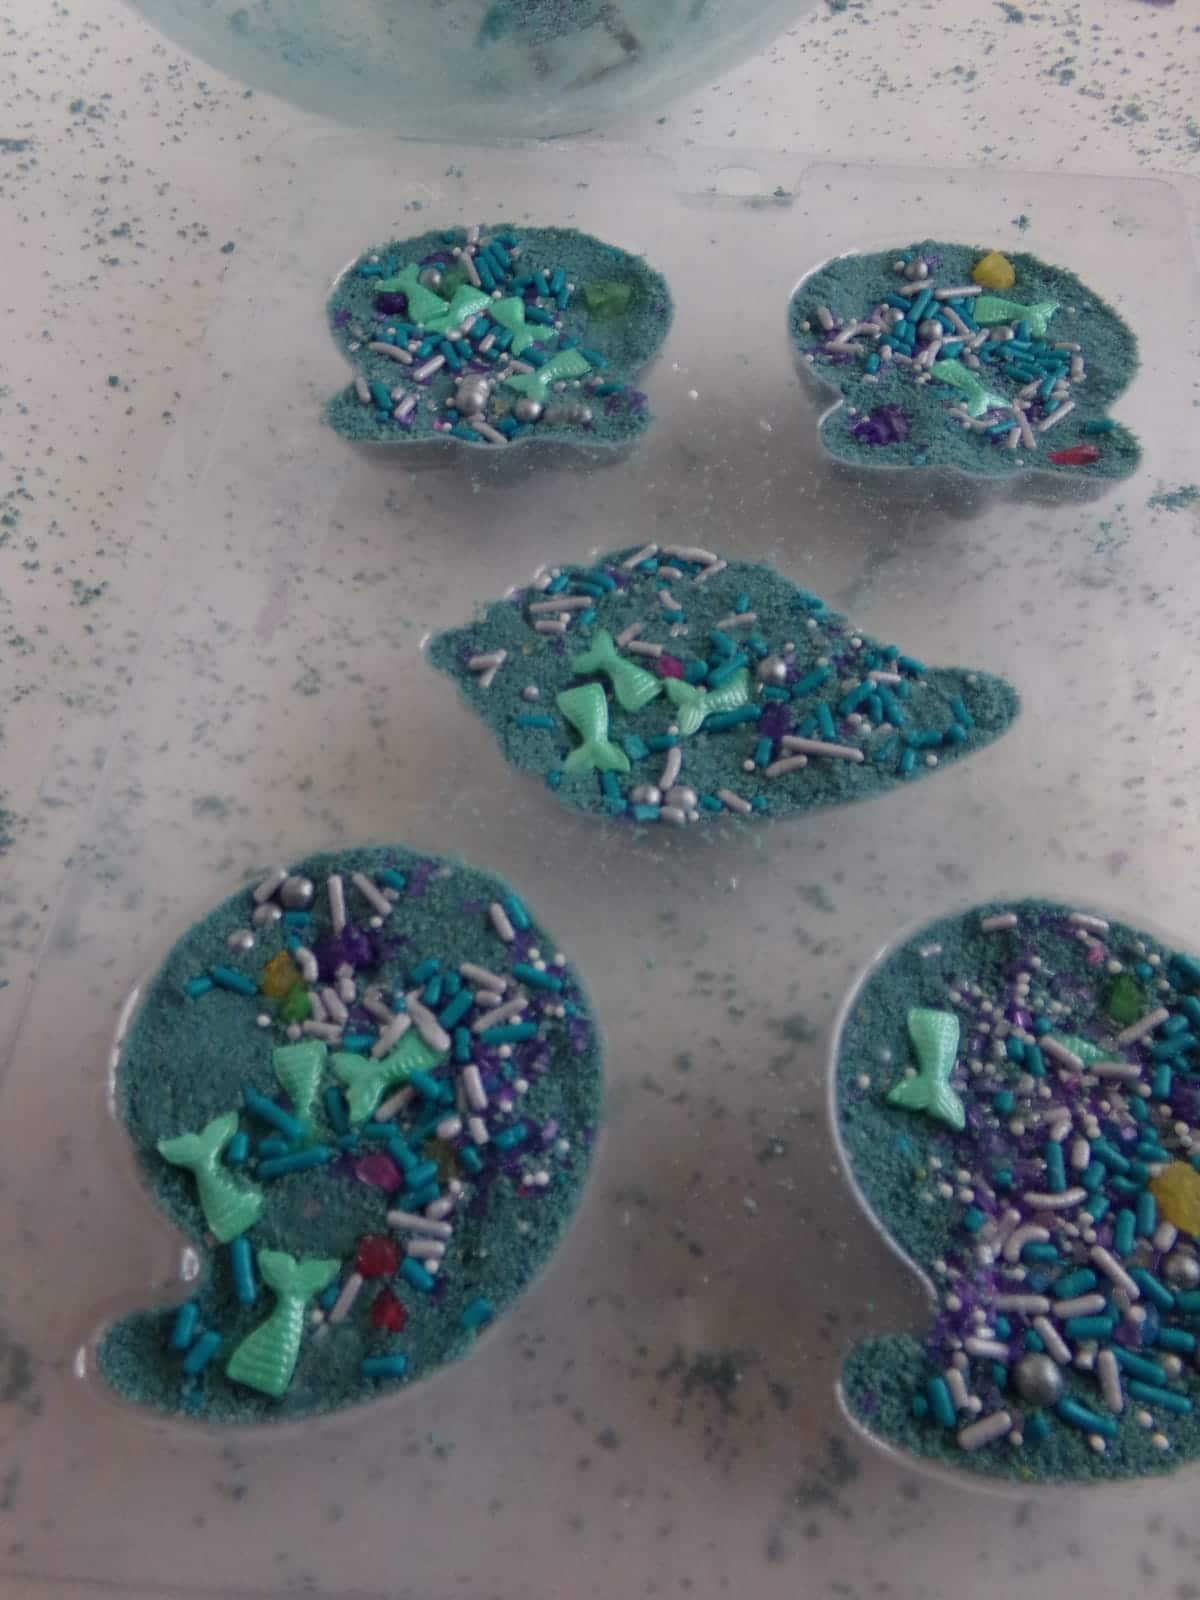 in-process step of filling molds to make mermaid shell bath bombs